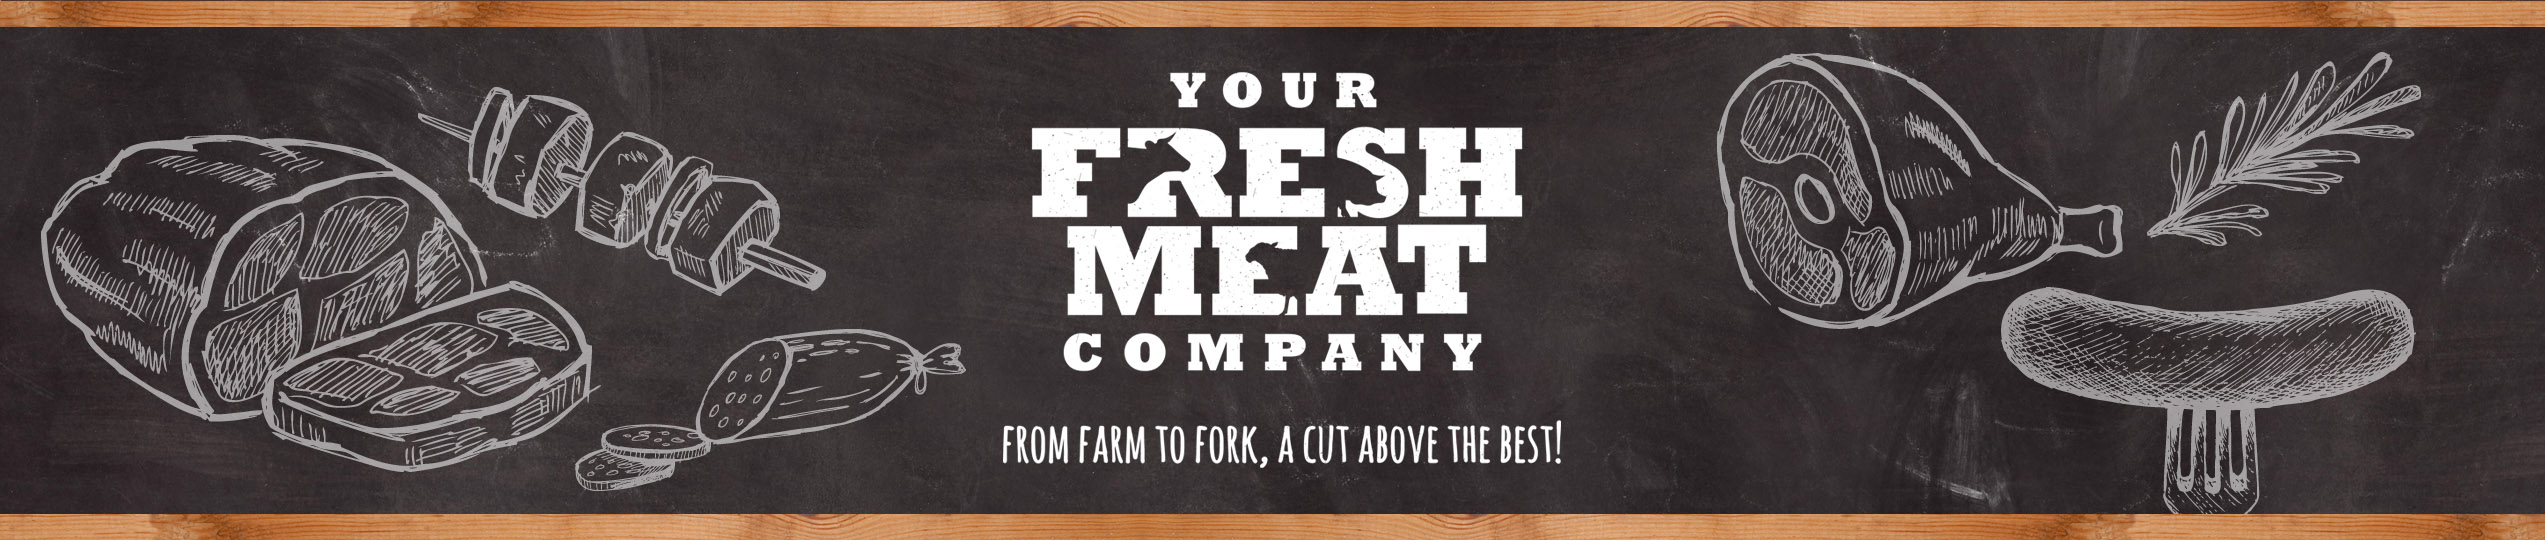 your fresh meat company from farm to fork a cut above the best!